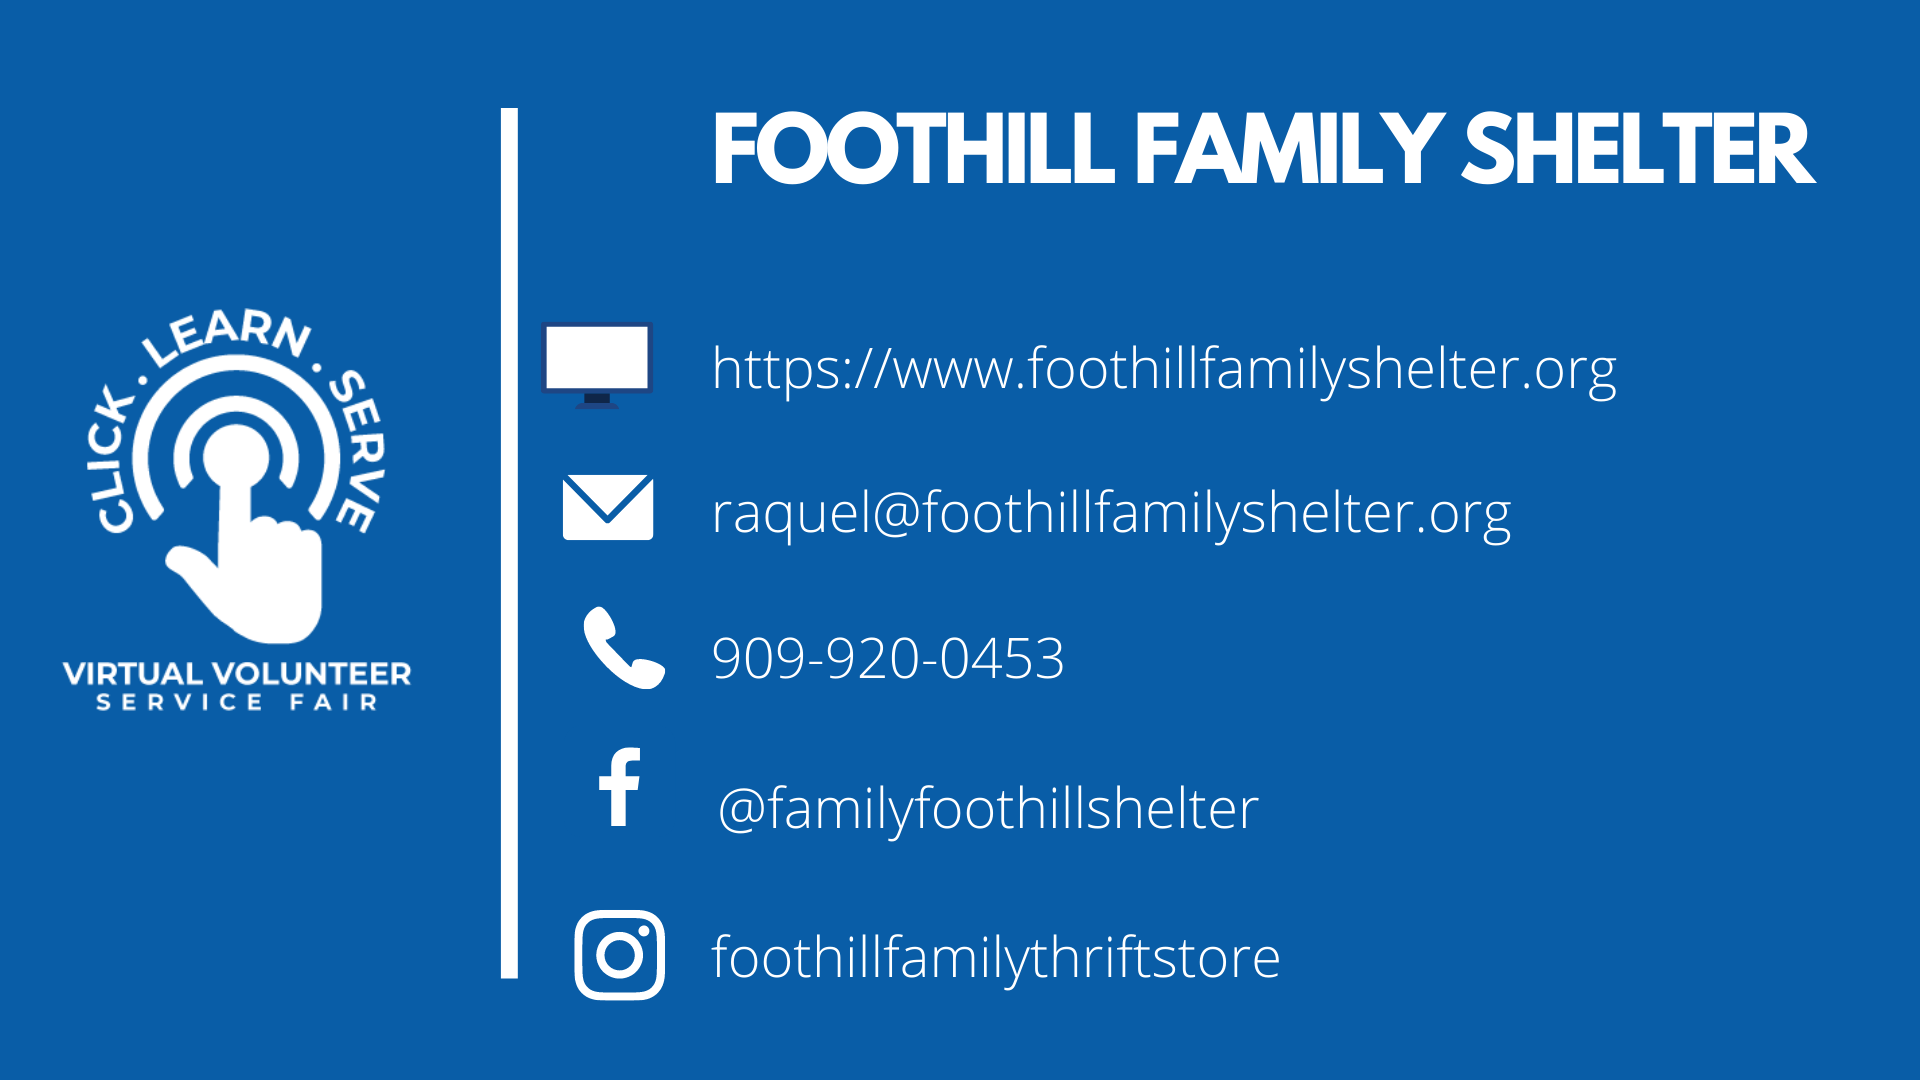 Foothill Family Shelter nonprofit video for Virtual Volunteer Service Fair.